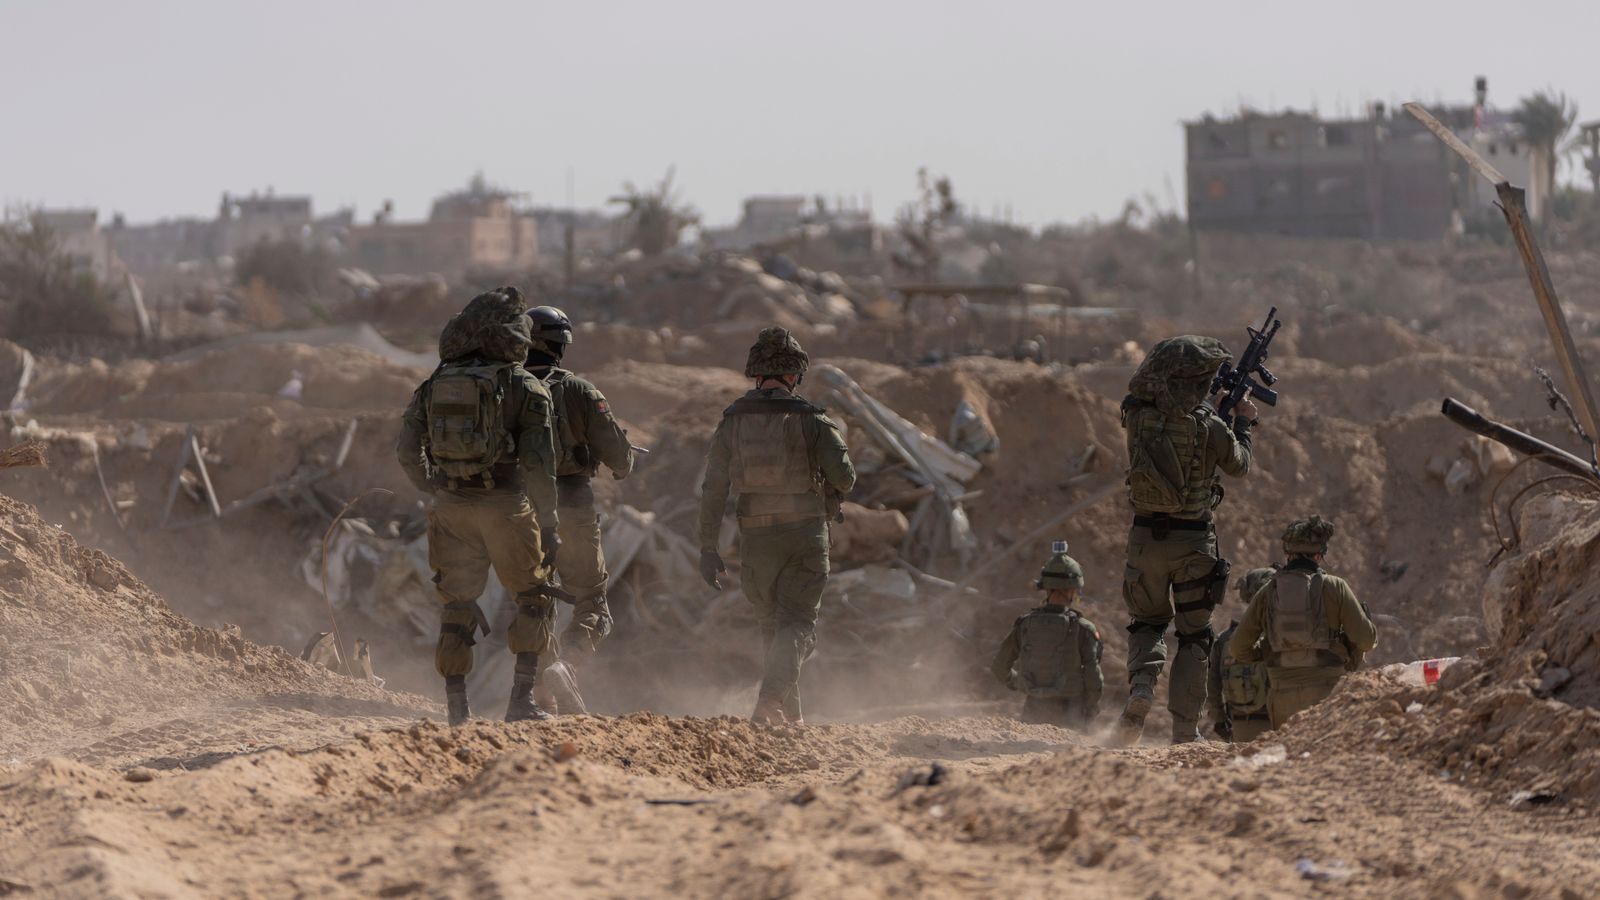 Significant moment as Israel withdraws troops from southern Gaza - here's what it could mean for war